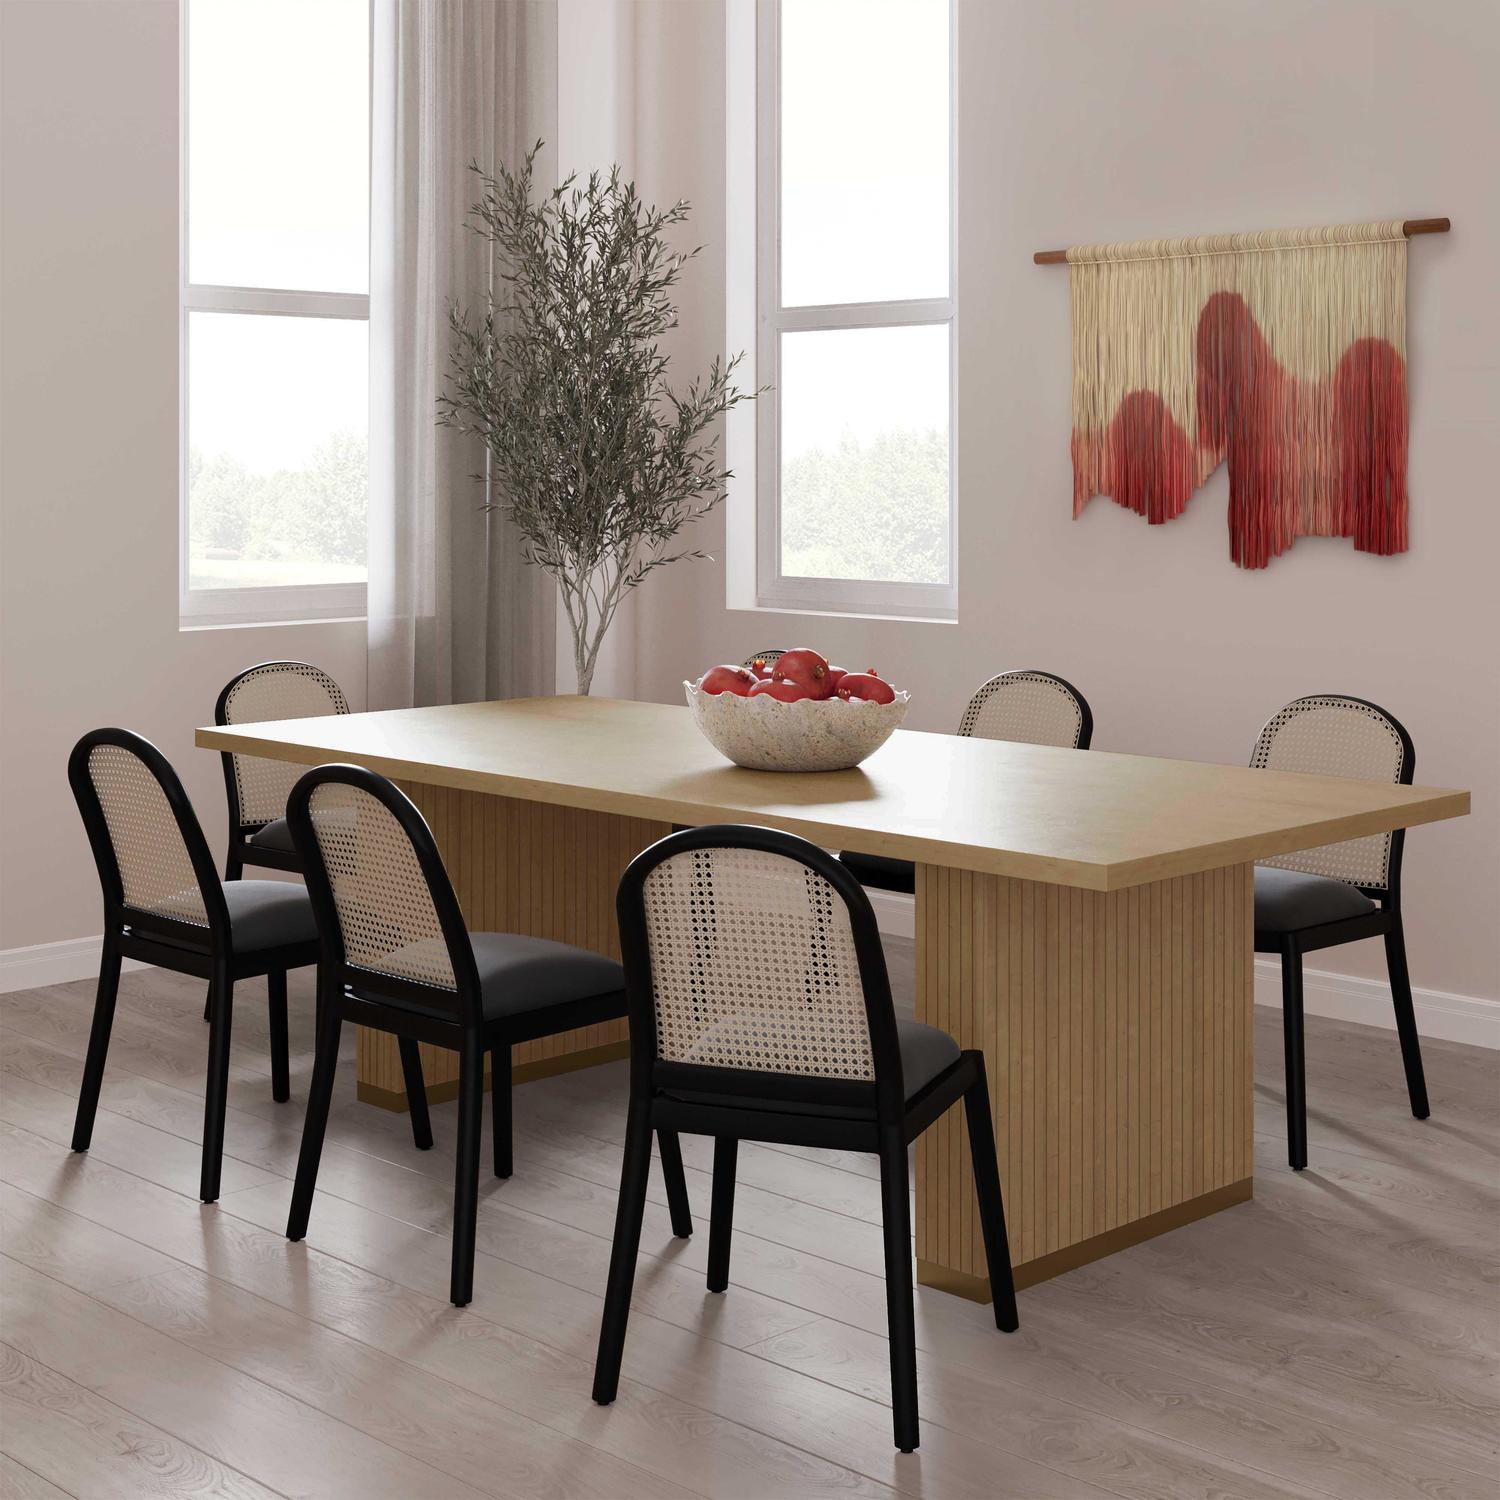 white marble dining table set for 4 Tov Furniture Dining Tables Natural Oak